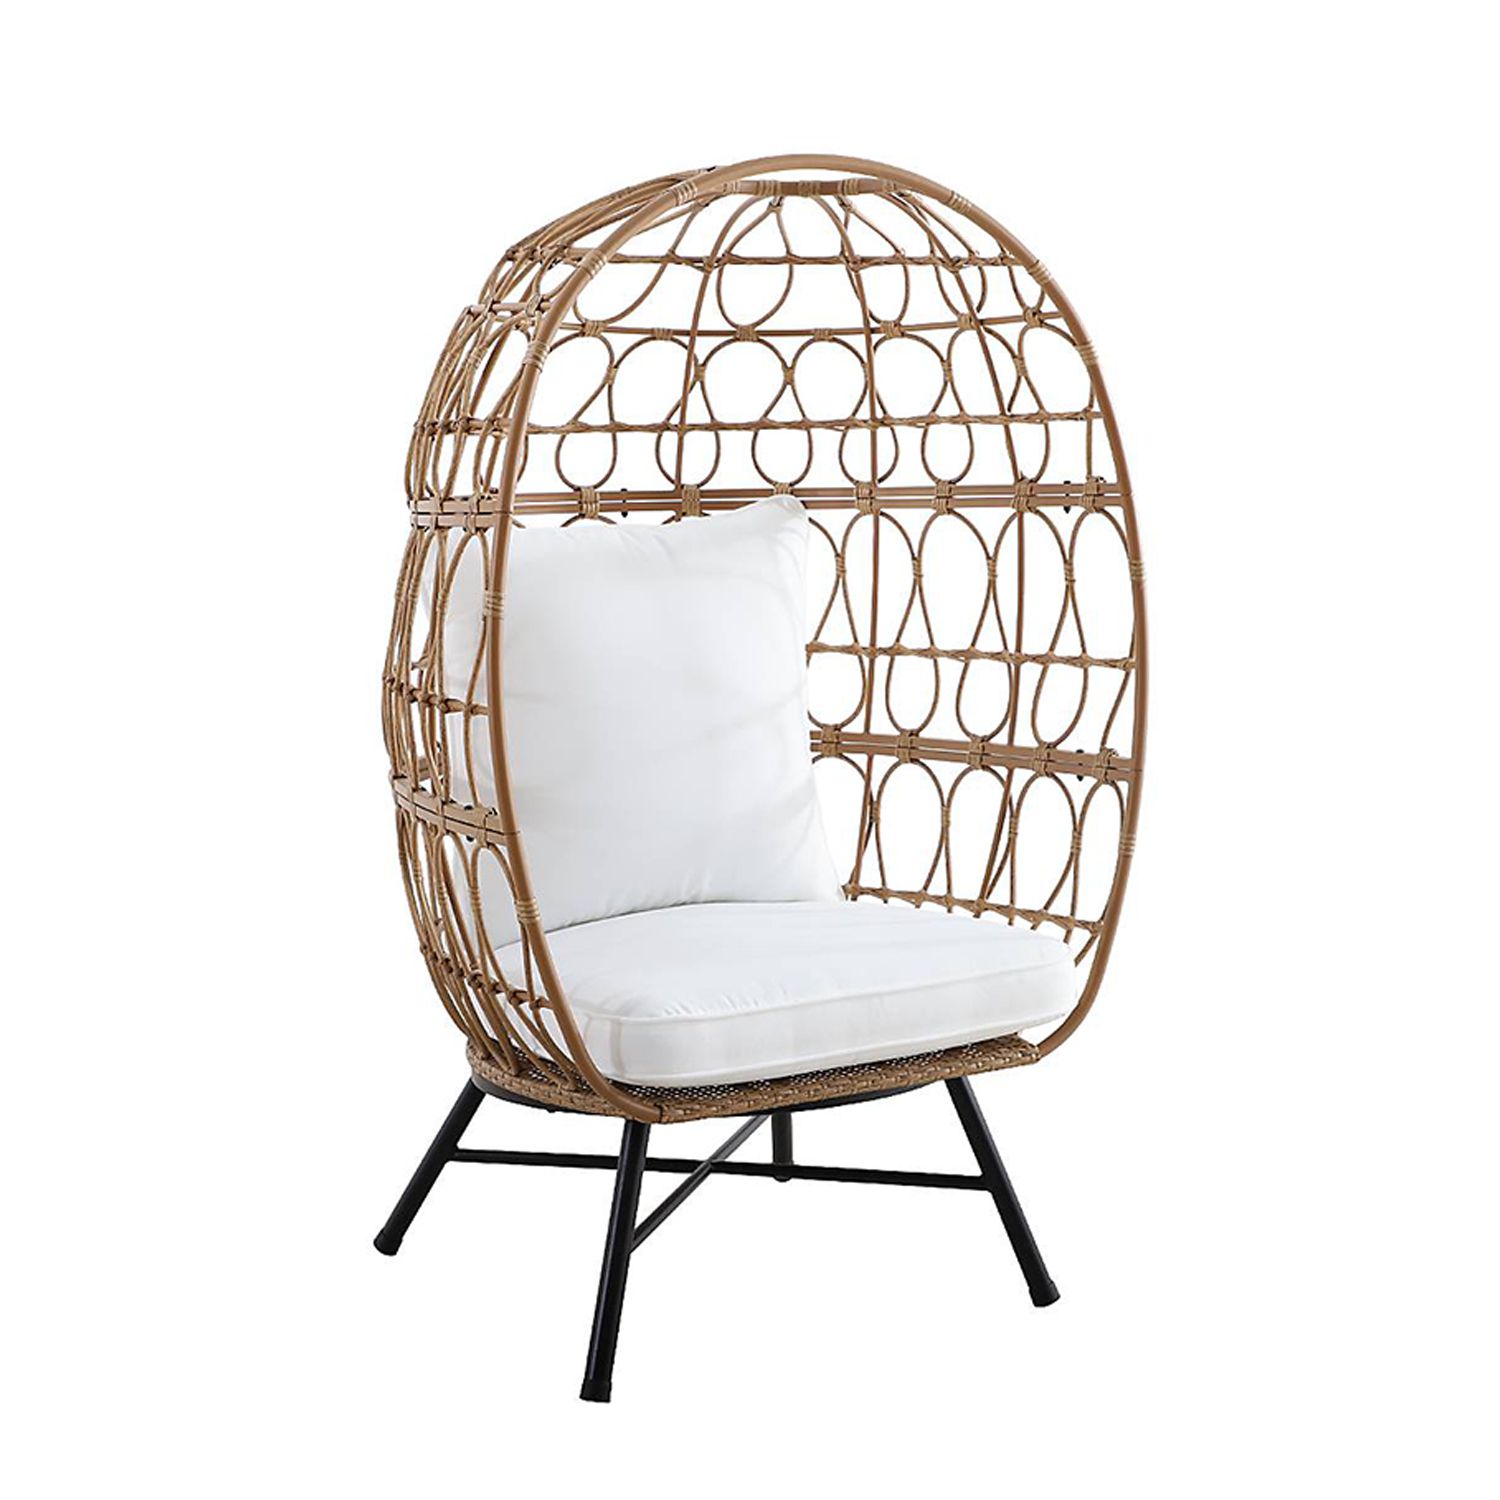 12 Best Outdoor Wicker Egg Chairs To Buy For Your Patio In 21 Better Homes Gardens